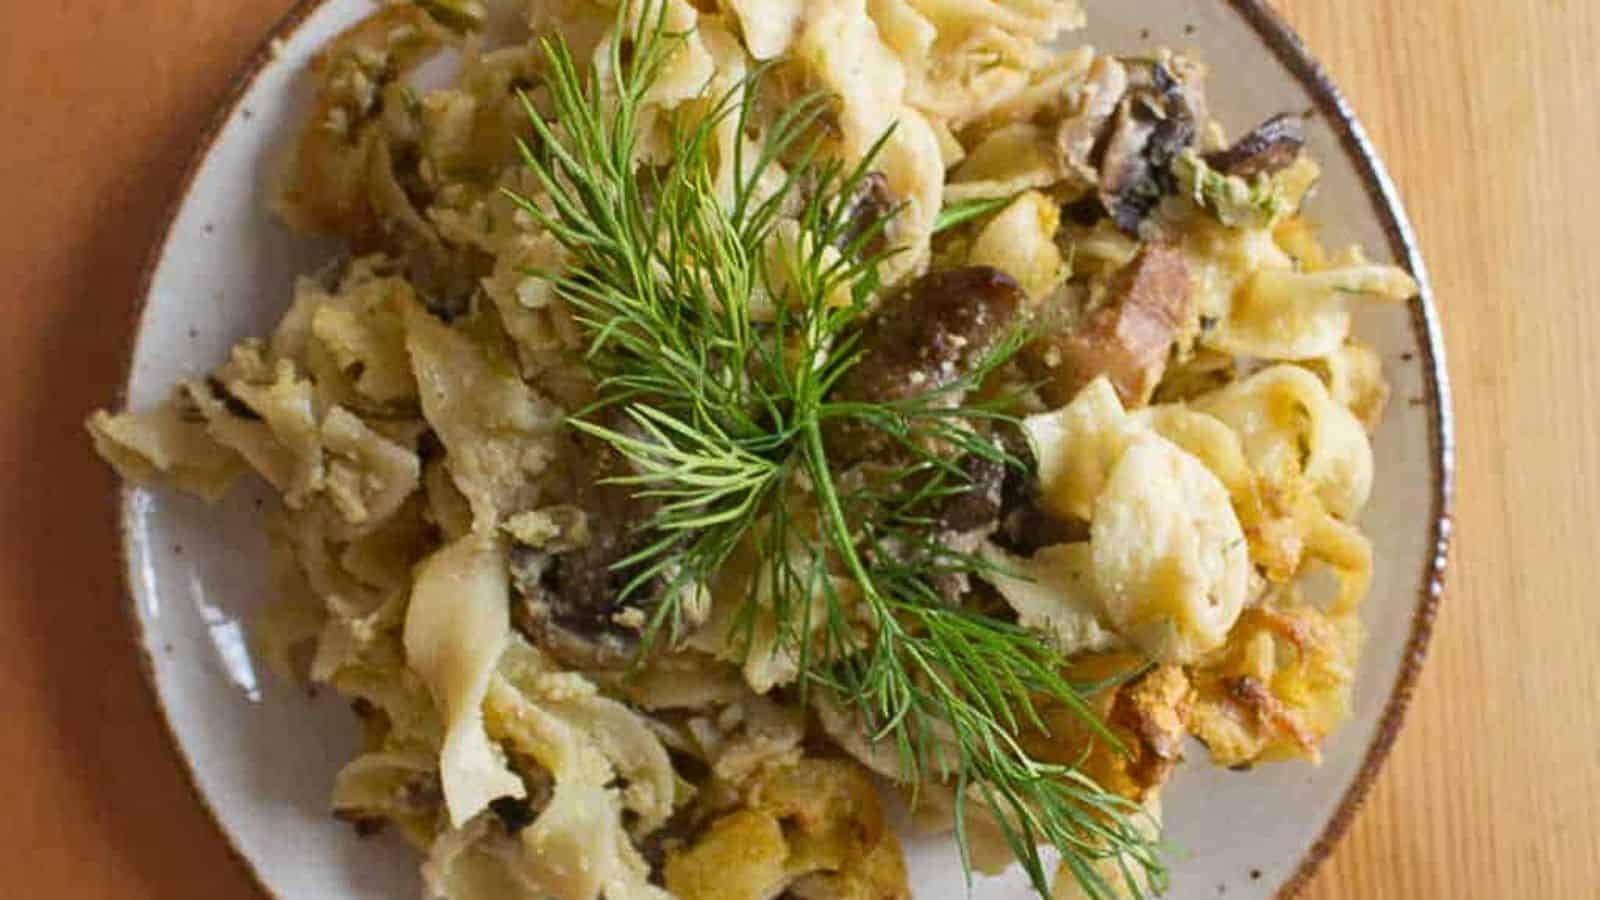 A plate of pasta with mushrooms and sprigs of dill.